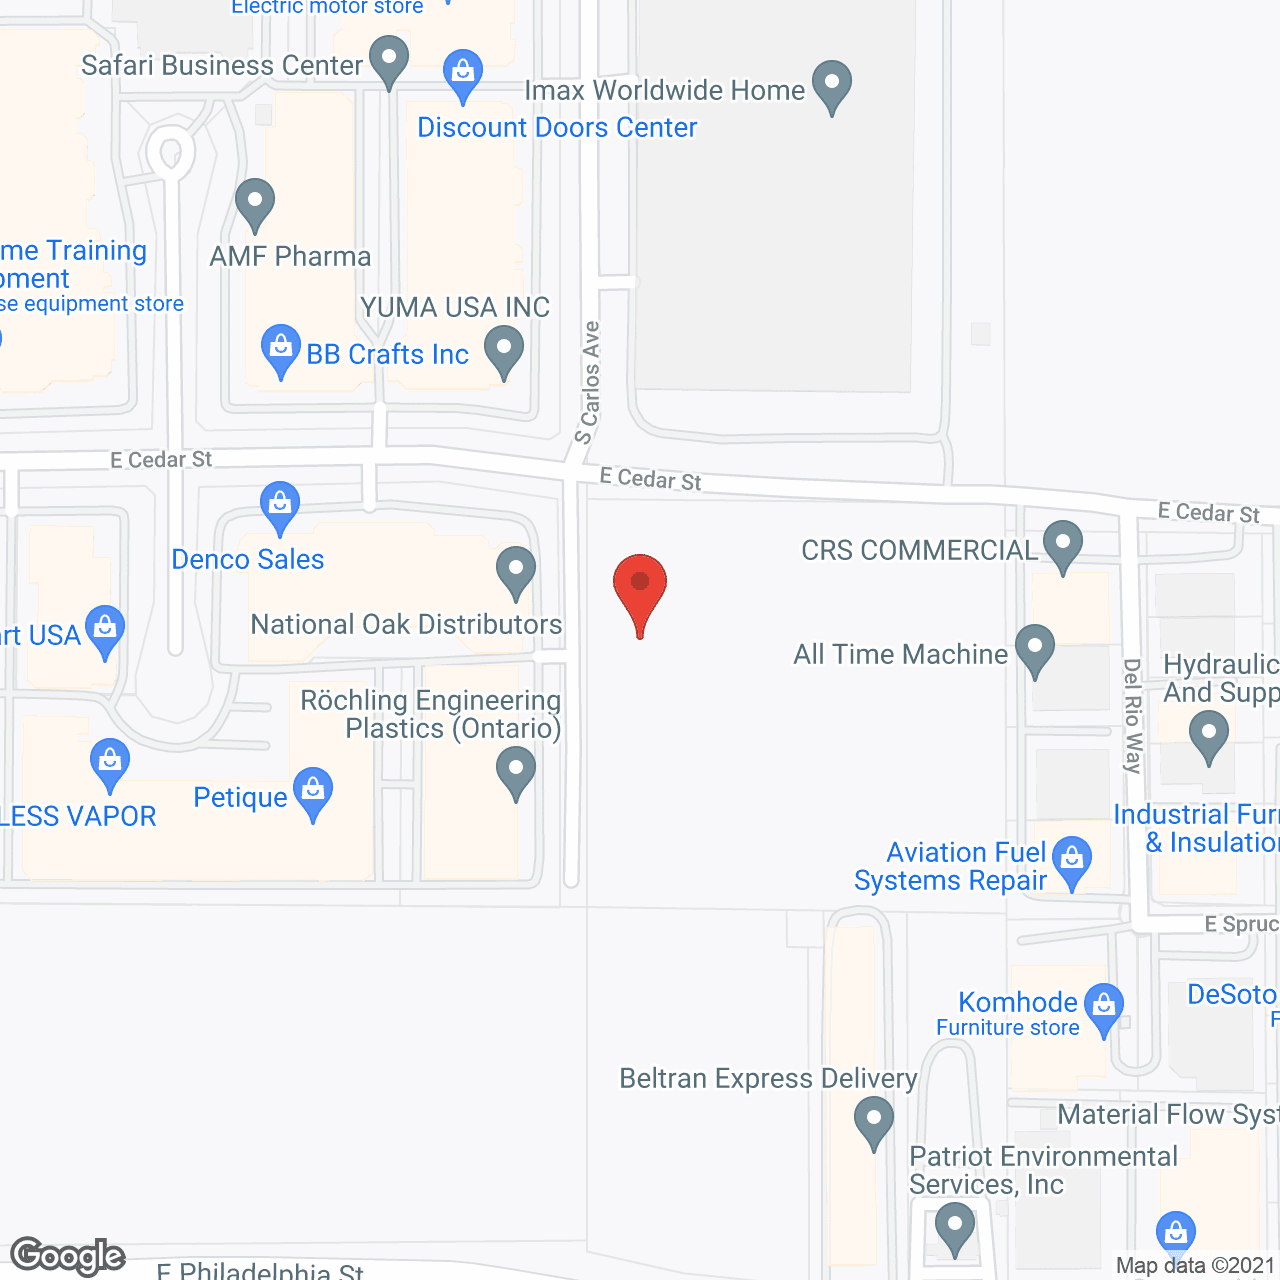 123 Home Care Services Orange County l, LLC - Ontario, CA in google map